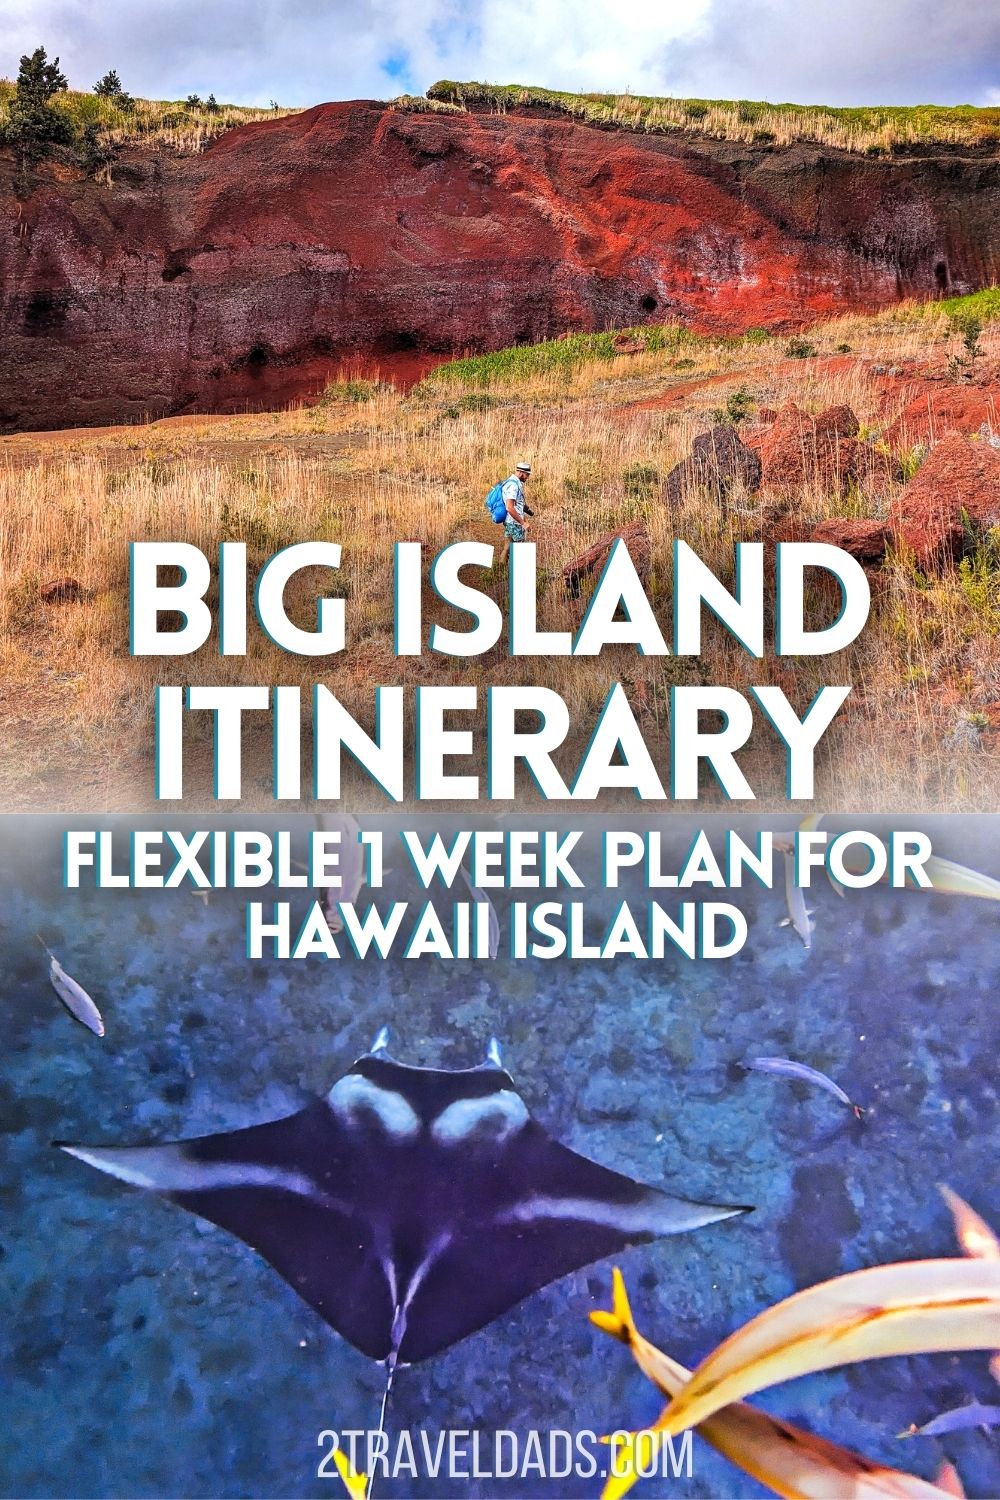 This easy and unique Big Island itinerary is perfect for a road trip on the most unusual of the Hawaiian Islands. From Hawaii Volcanoes National Park to swimming in waterfalls, chocolate farms to swimming with manta rays, this Big Island travel plan has it all.